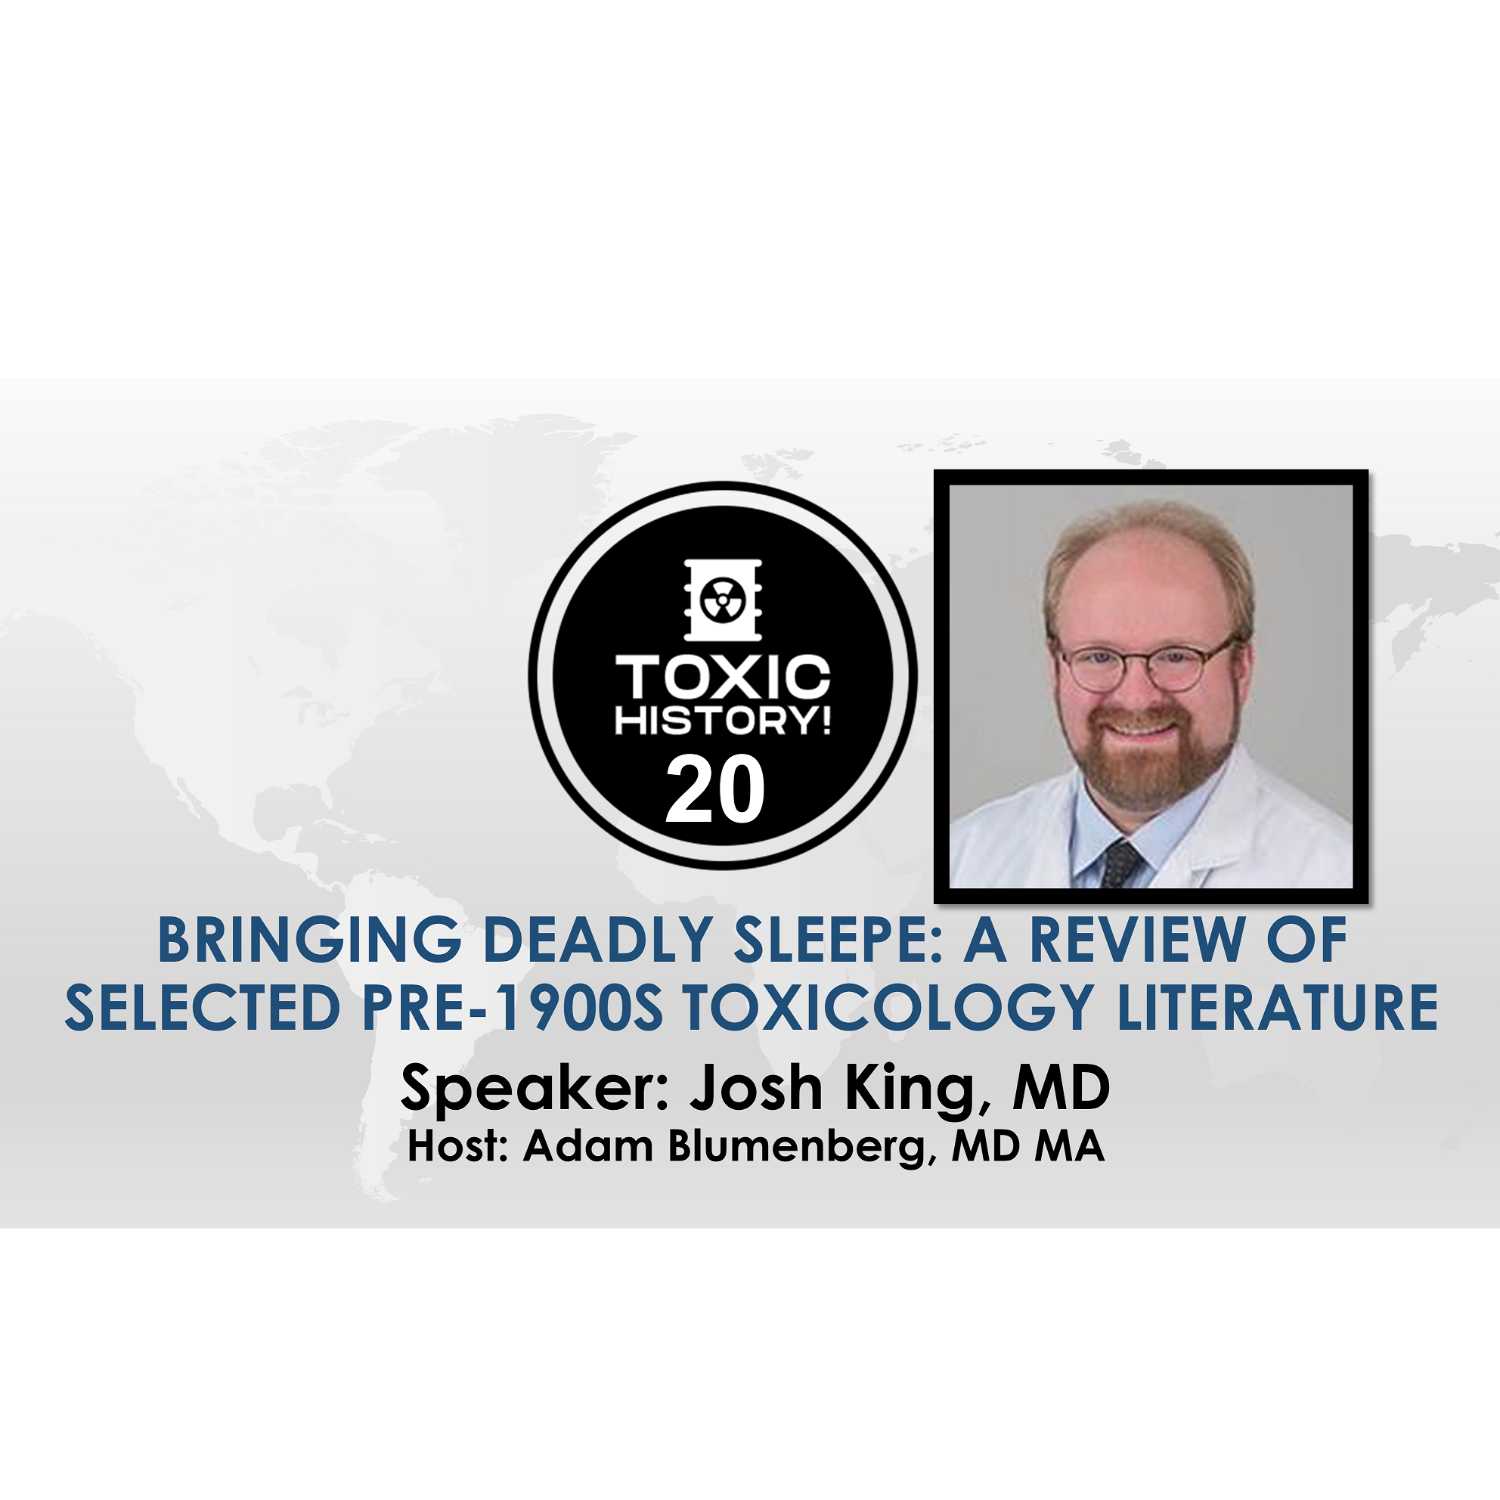 Bringing Deadly Sleepe: A Review of Selected Pre-1900s Toxicology Literature